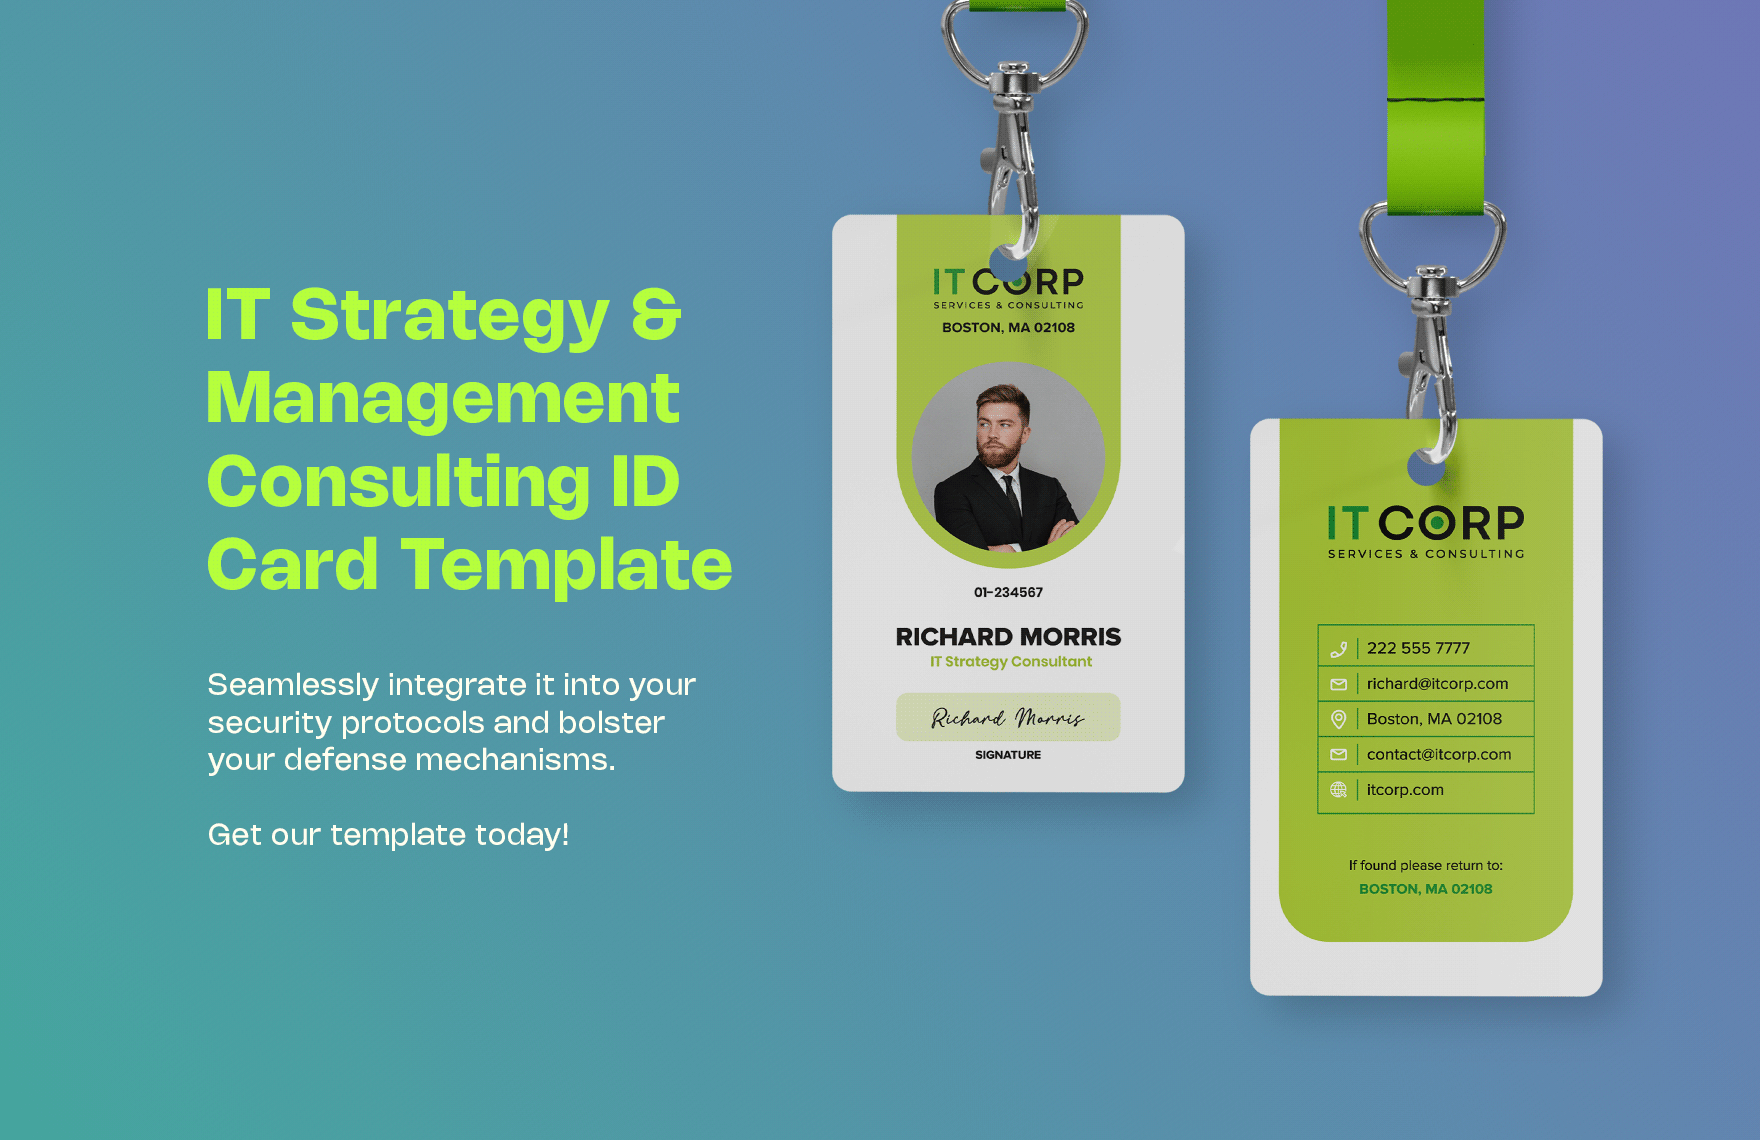 IT Strategy & Management Consulting ID Card Template